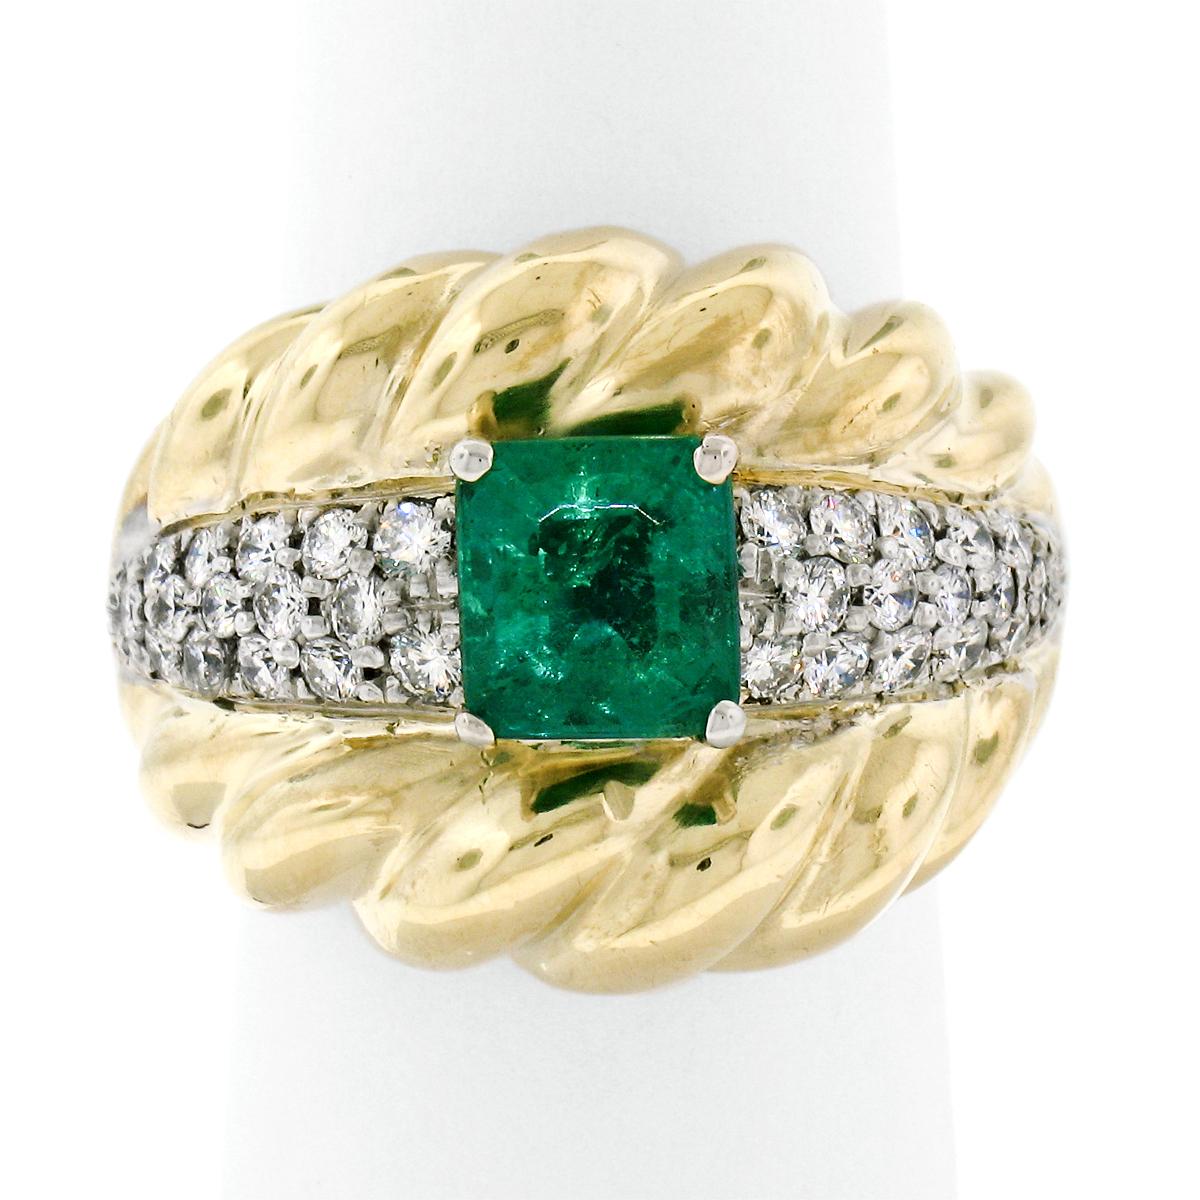 This large, gorgeous cocktail ring was crafted in solid 18k yellow gold and features a magnificent, GIA certified, natural Colombian emerald prong set at its center. This emerald has a very fine, clean and vivid green color that is guaranteed to